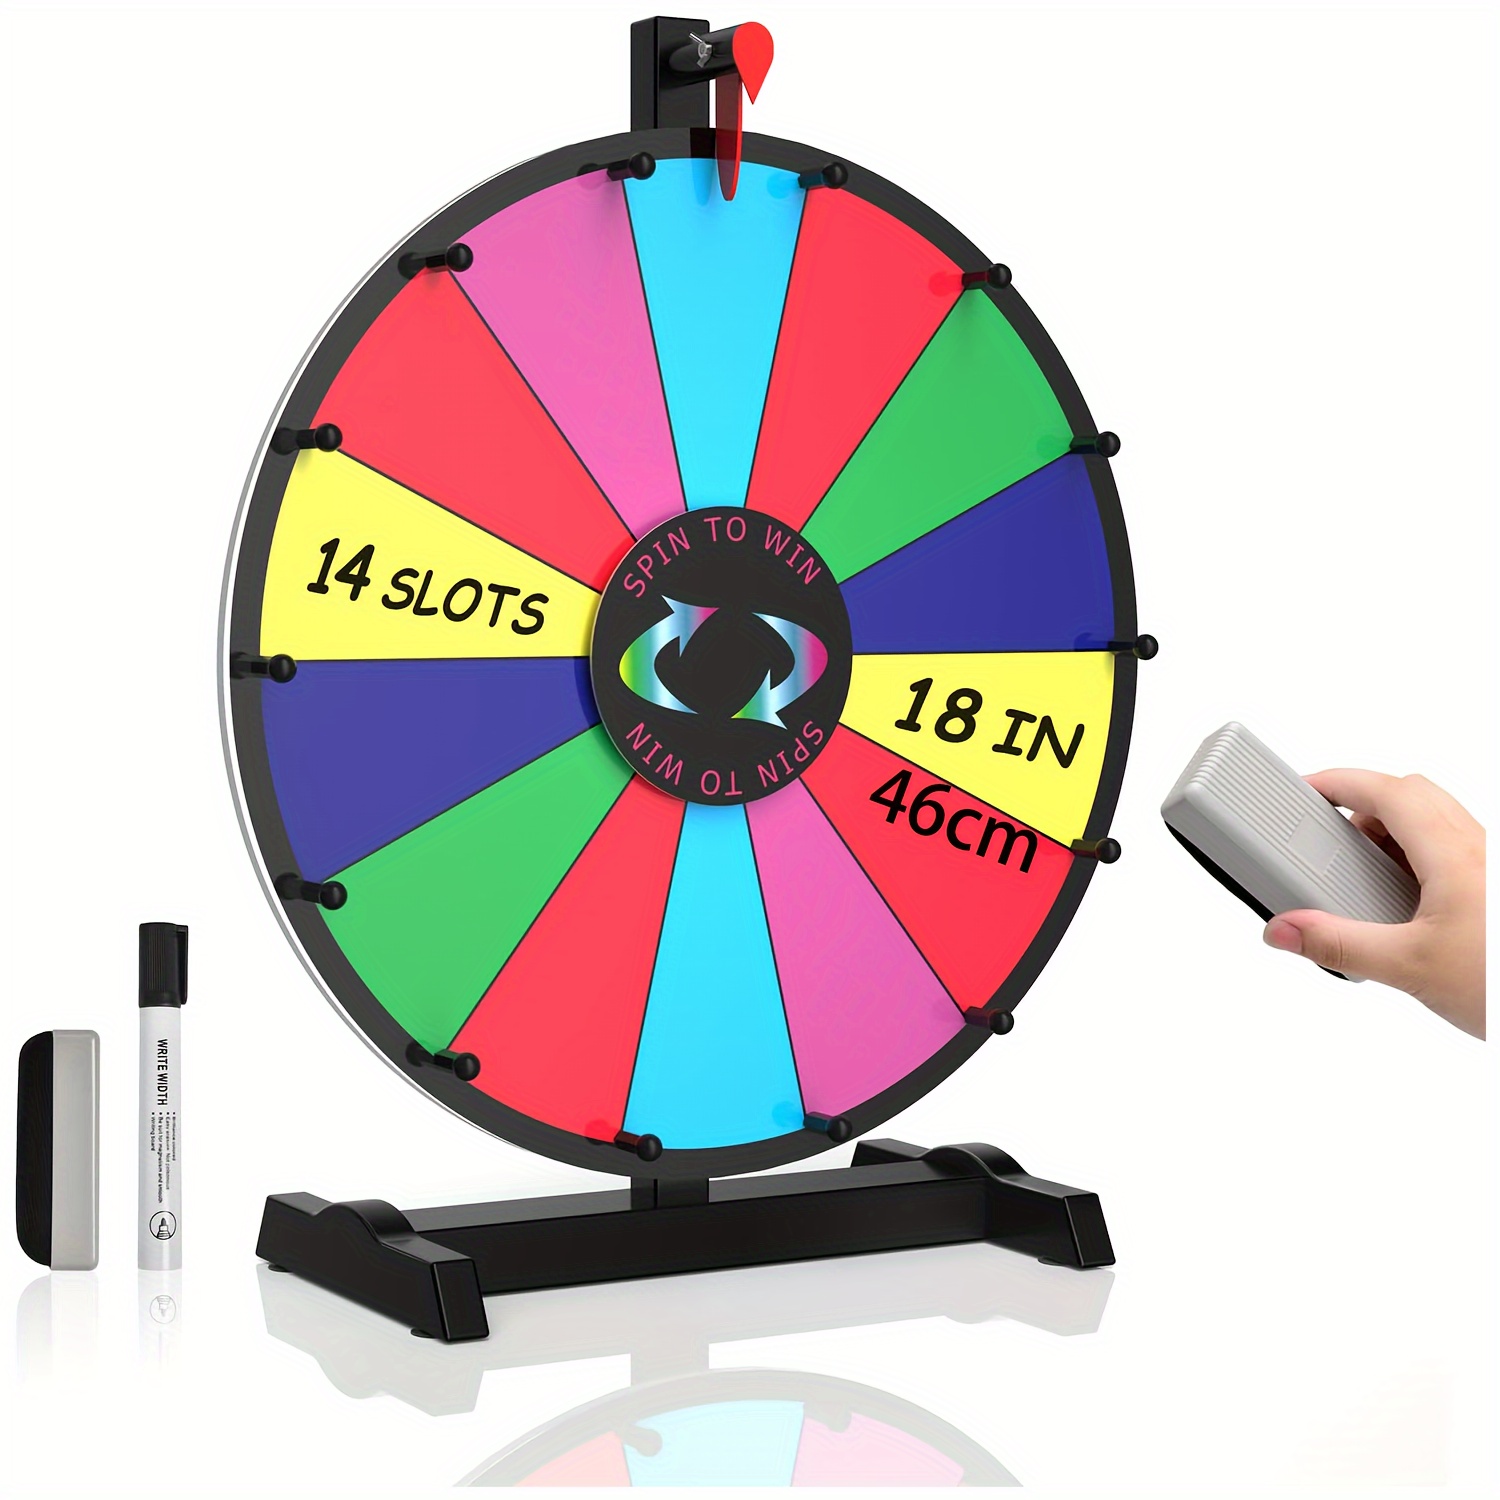 

1 Pc-18/24 Inch Spinning Prize Wheel, 14 Color Slots Tabletop Spinner, Heavy Duty Roulette Wheel For Carnival, Trade Show, Win Fortune Spin Games